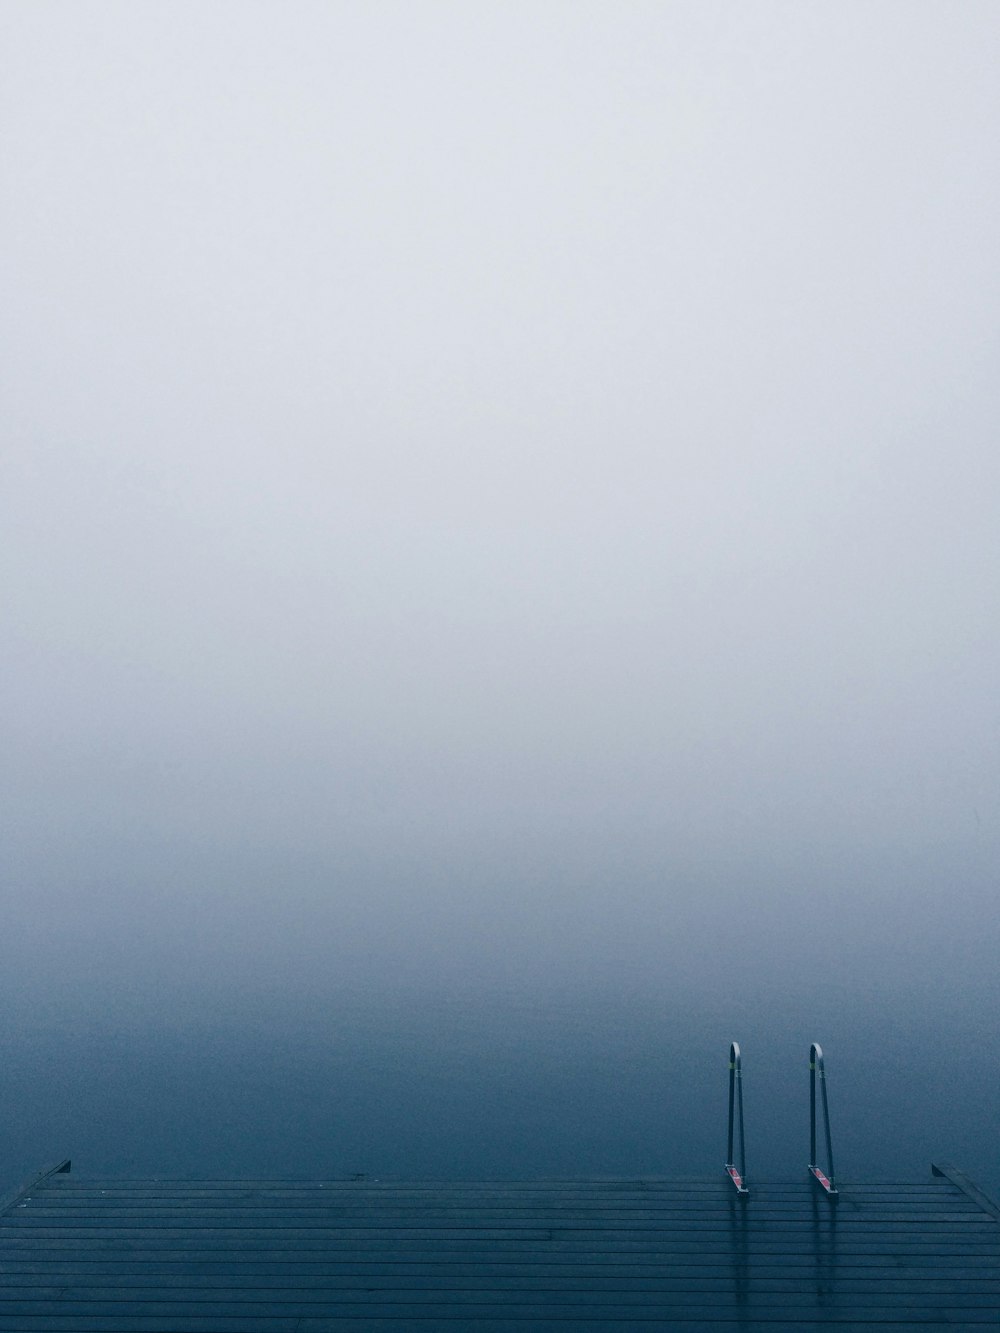 Lake pier with a ladder on serene waters on a foggy day